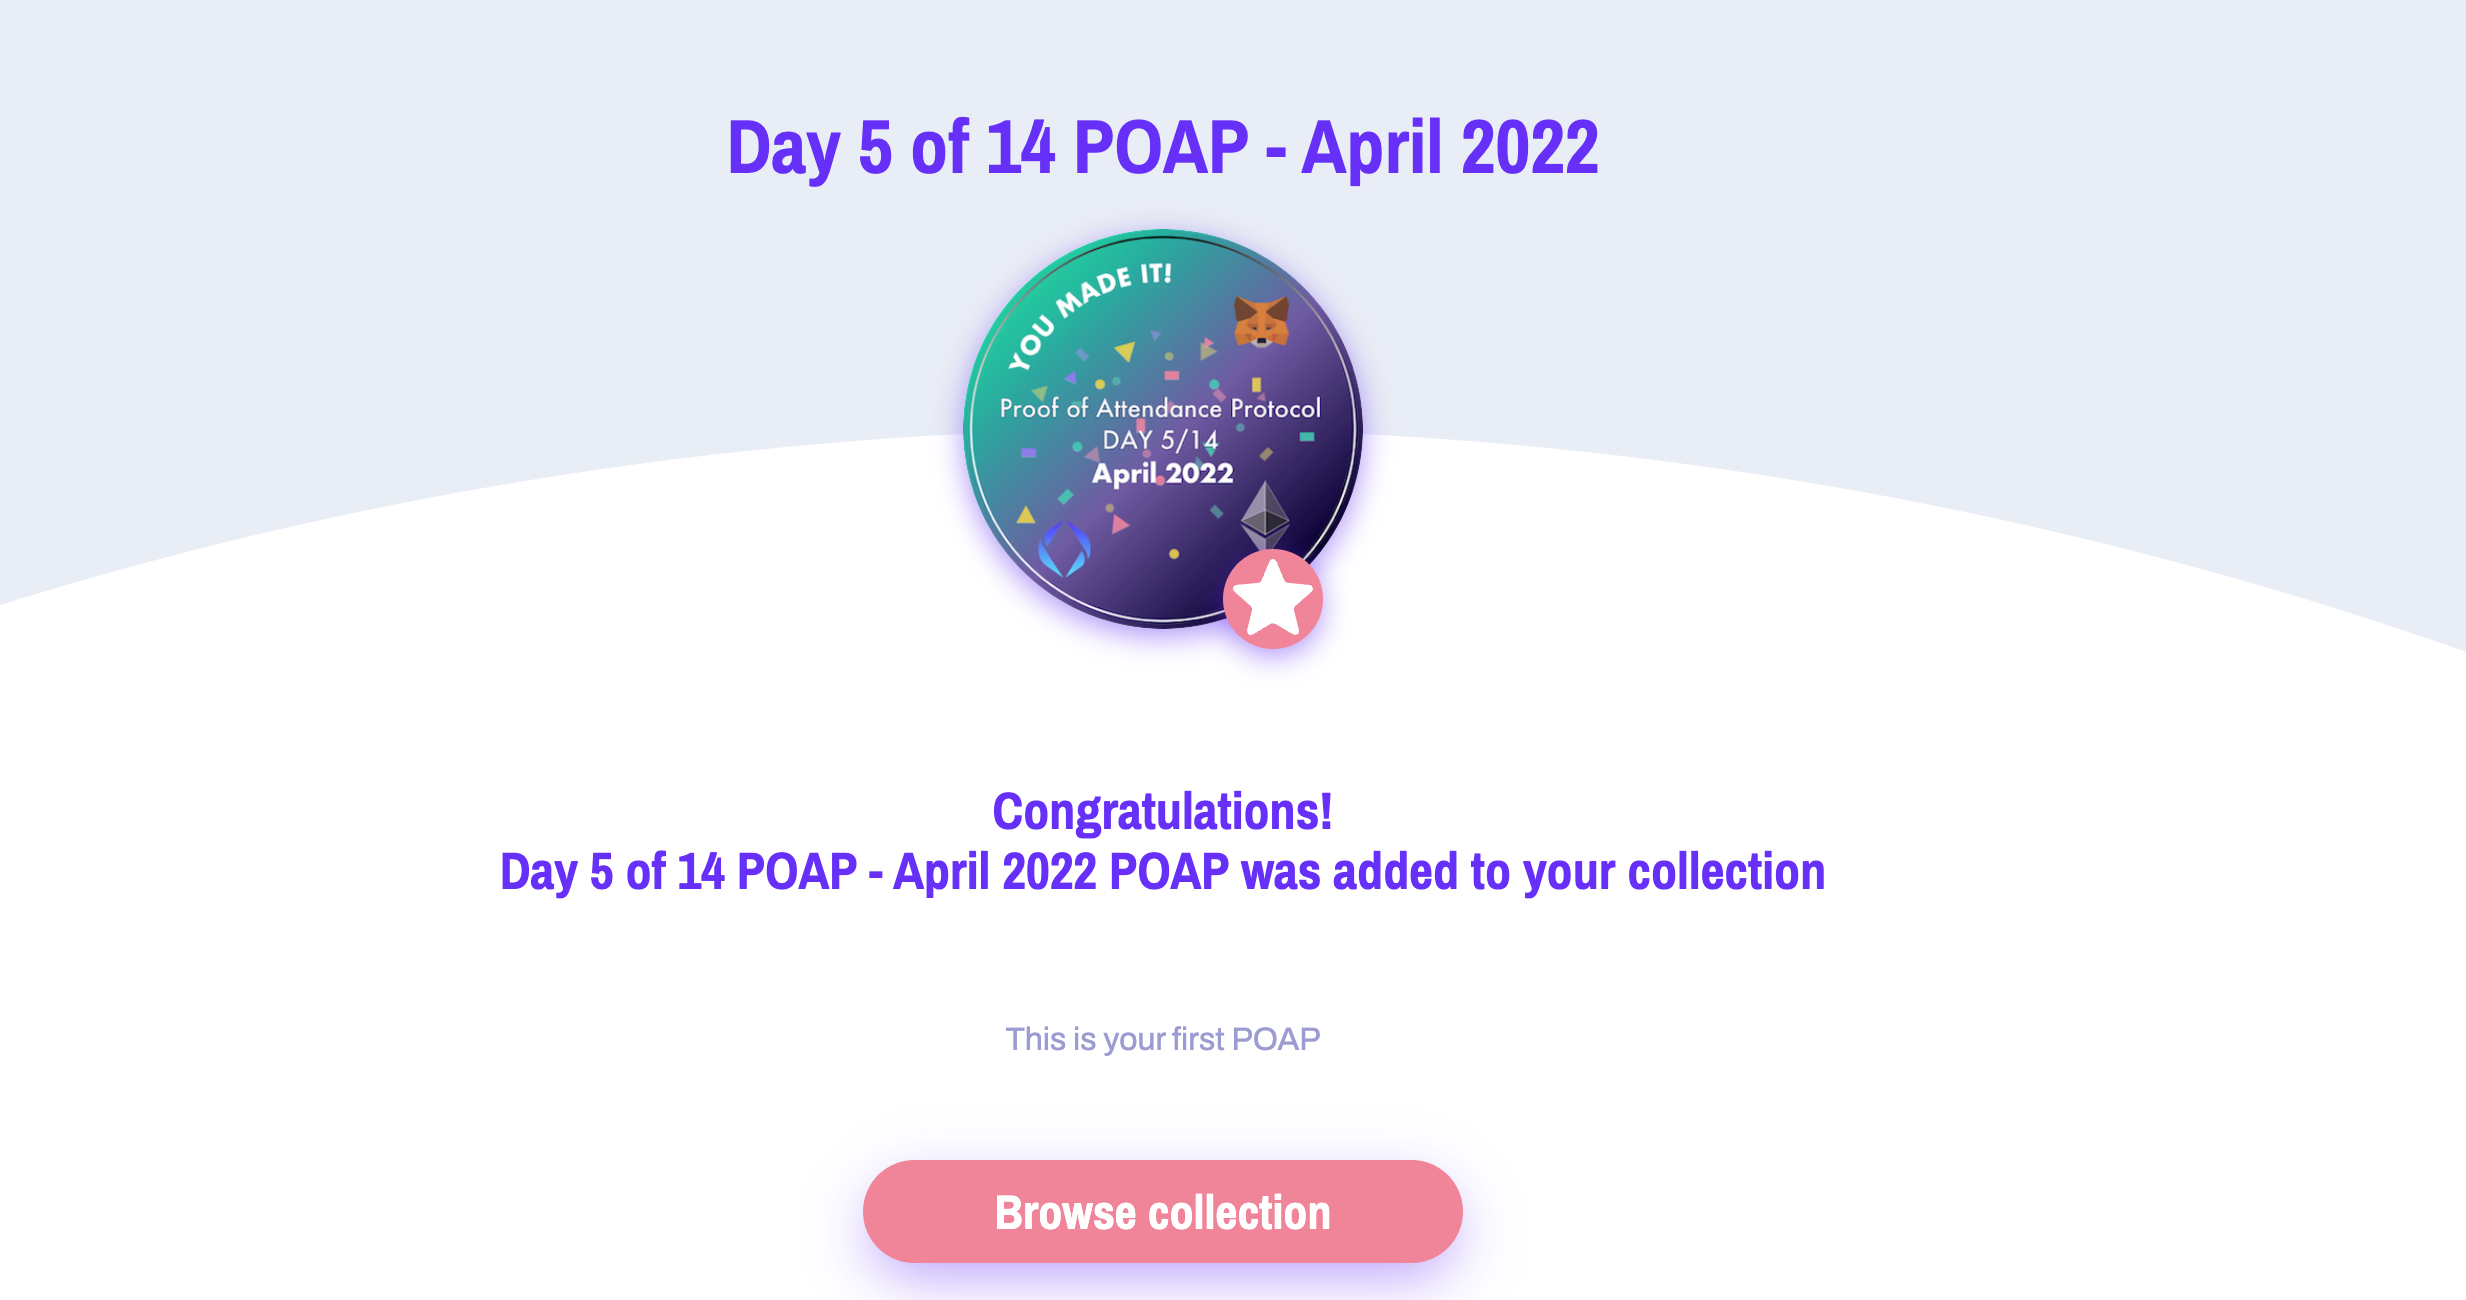 Congrats on receiving your first POAP!